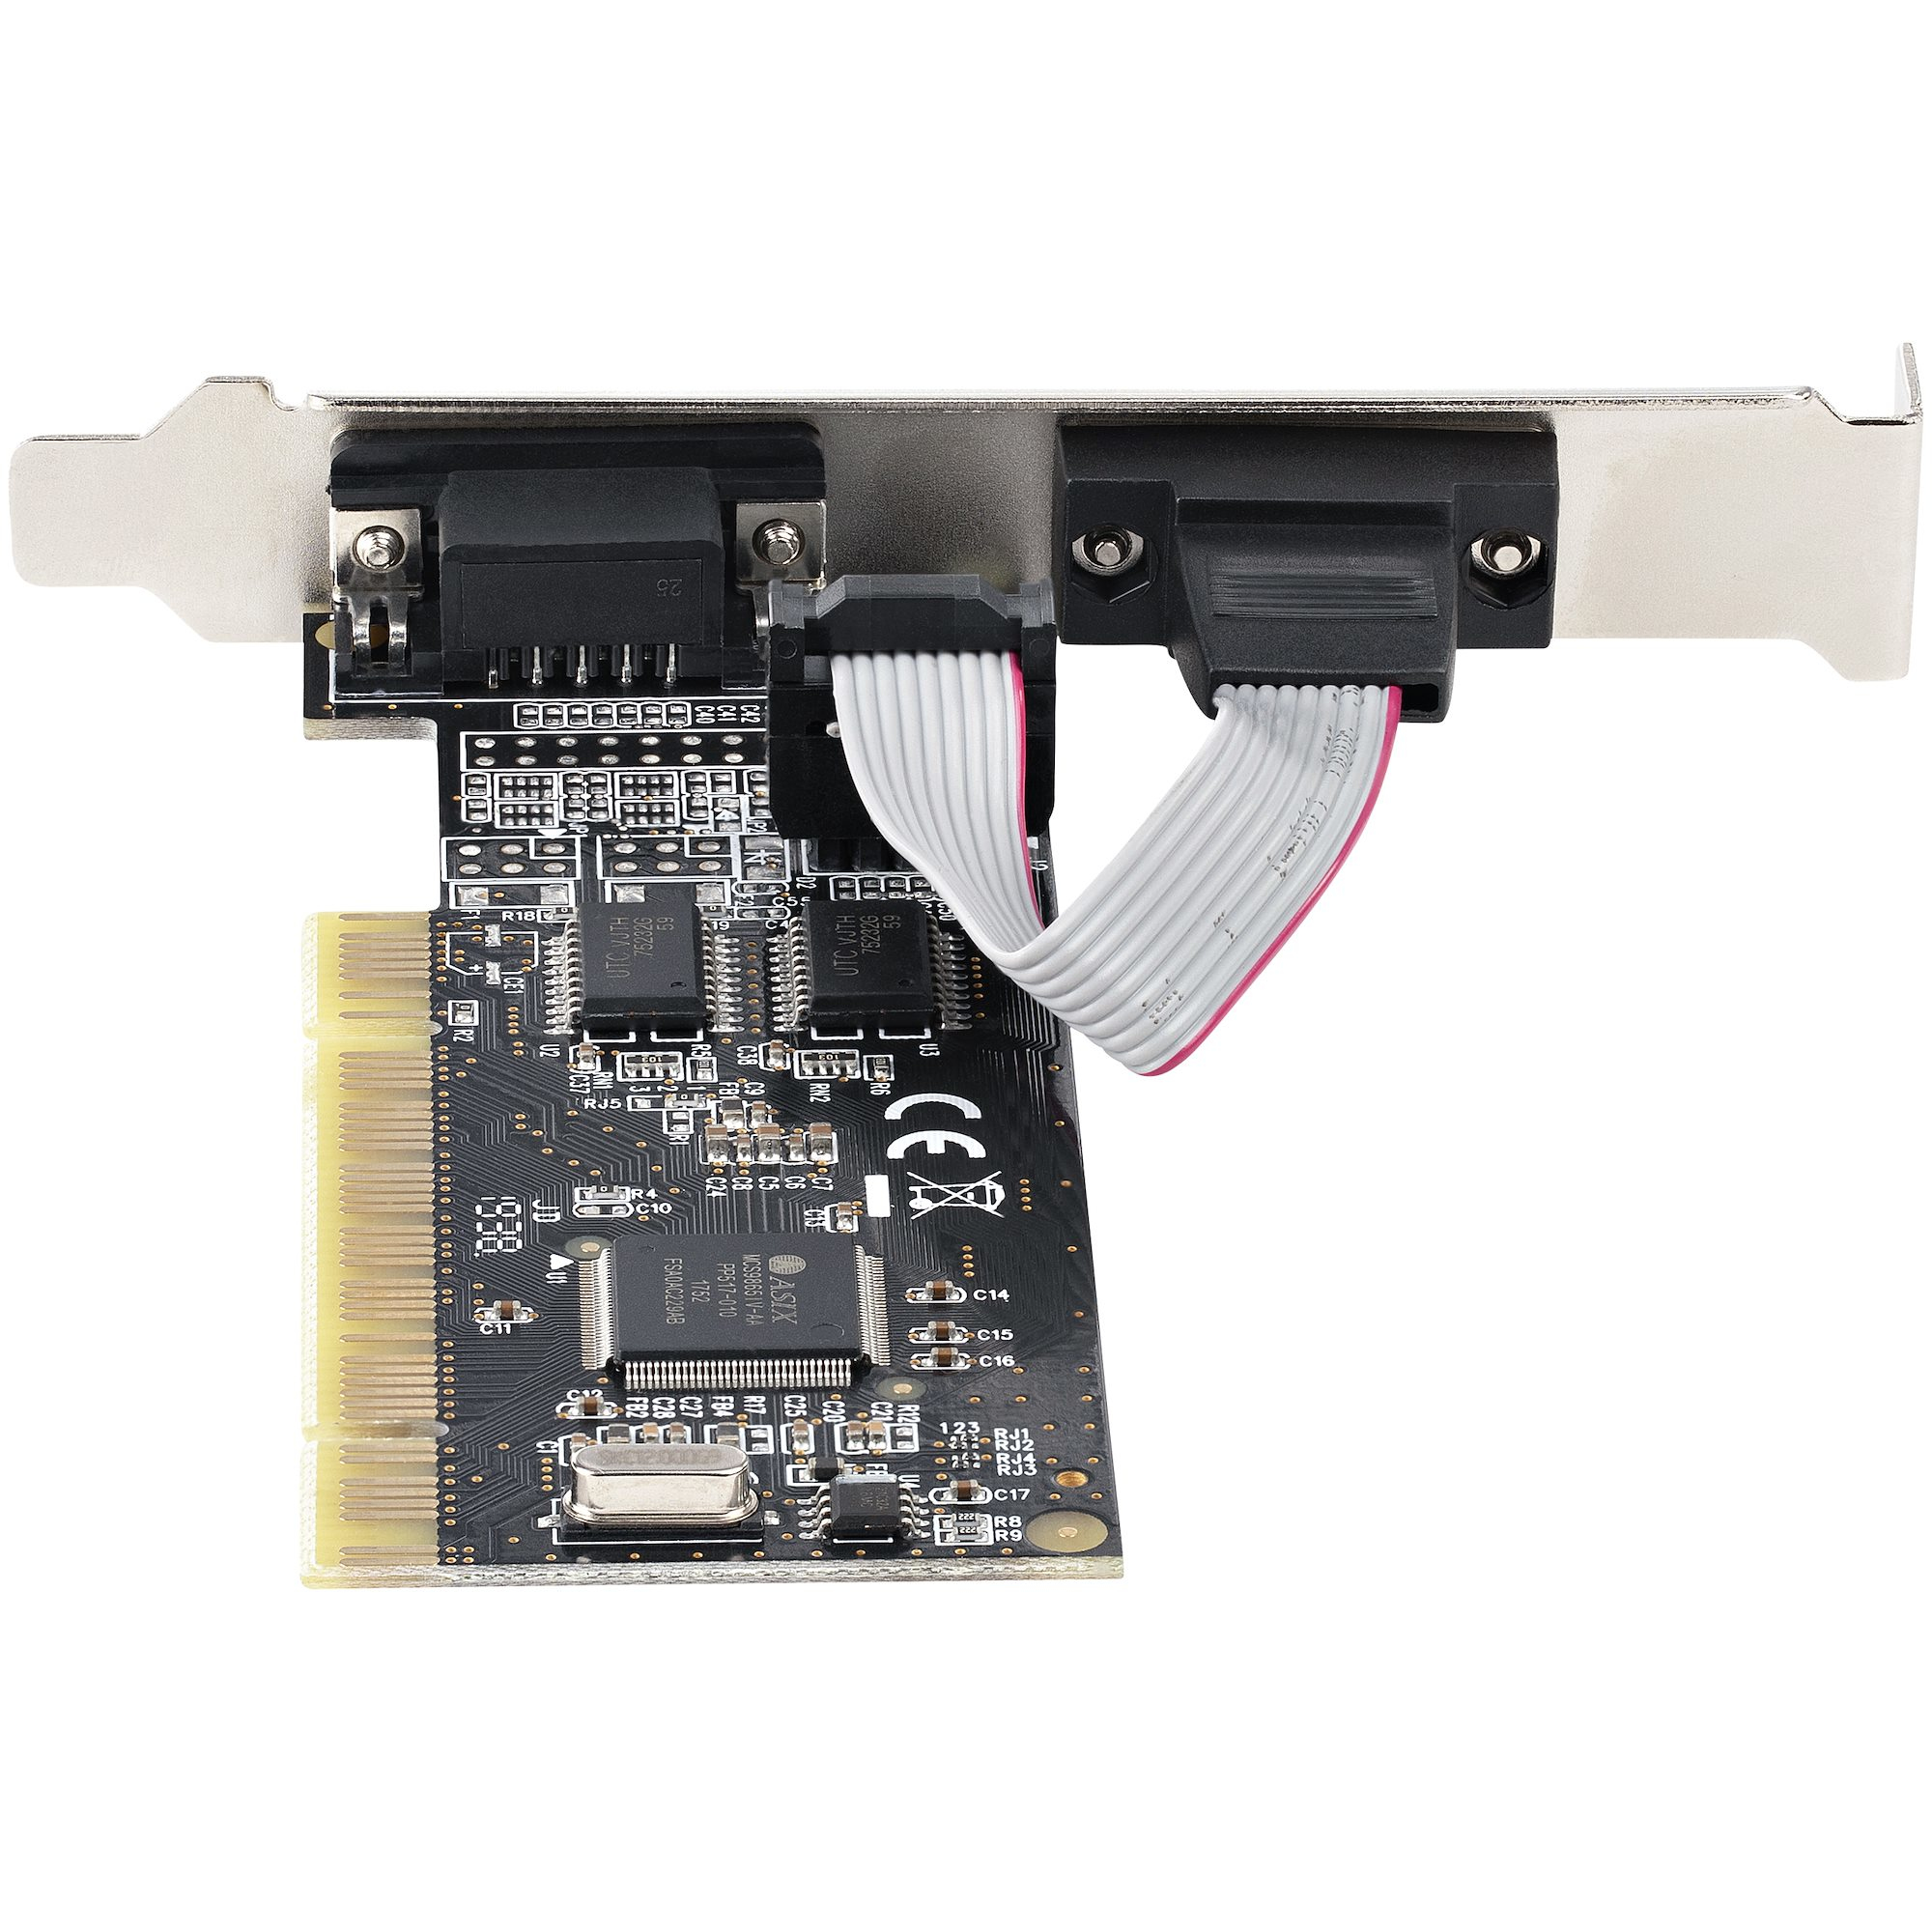 StarTech.com 2-Port PCI RS232 Serial Adapter Card - PCI Serial Port Expansion Controller Card - PCI to Dual Serial DB9 Card - Standard (Installed) & Low Profile Brackets - Windows/Linux